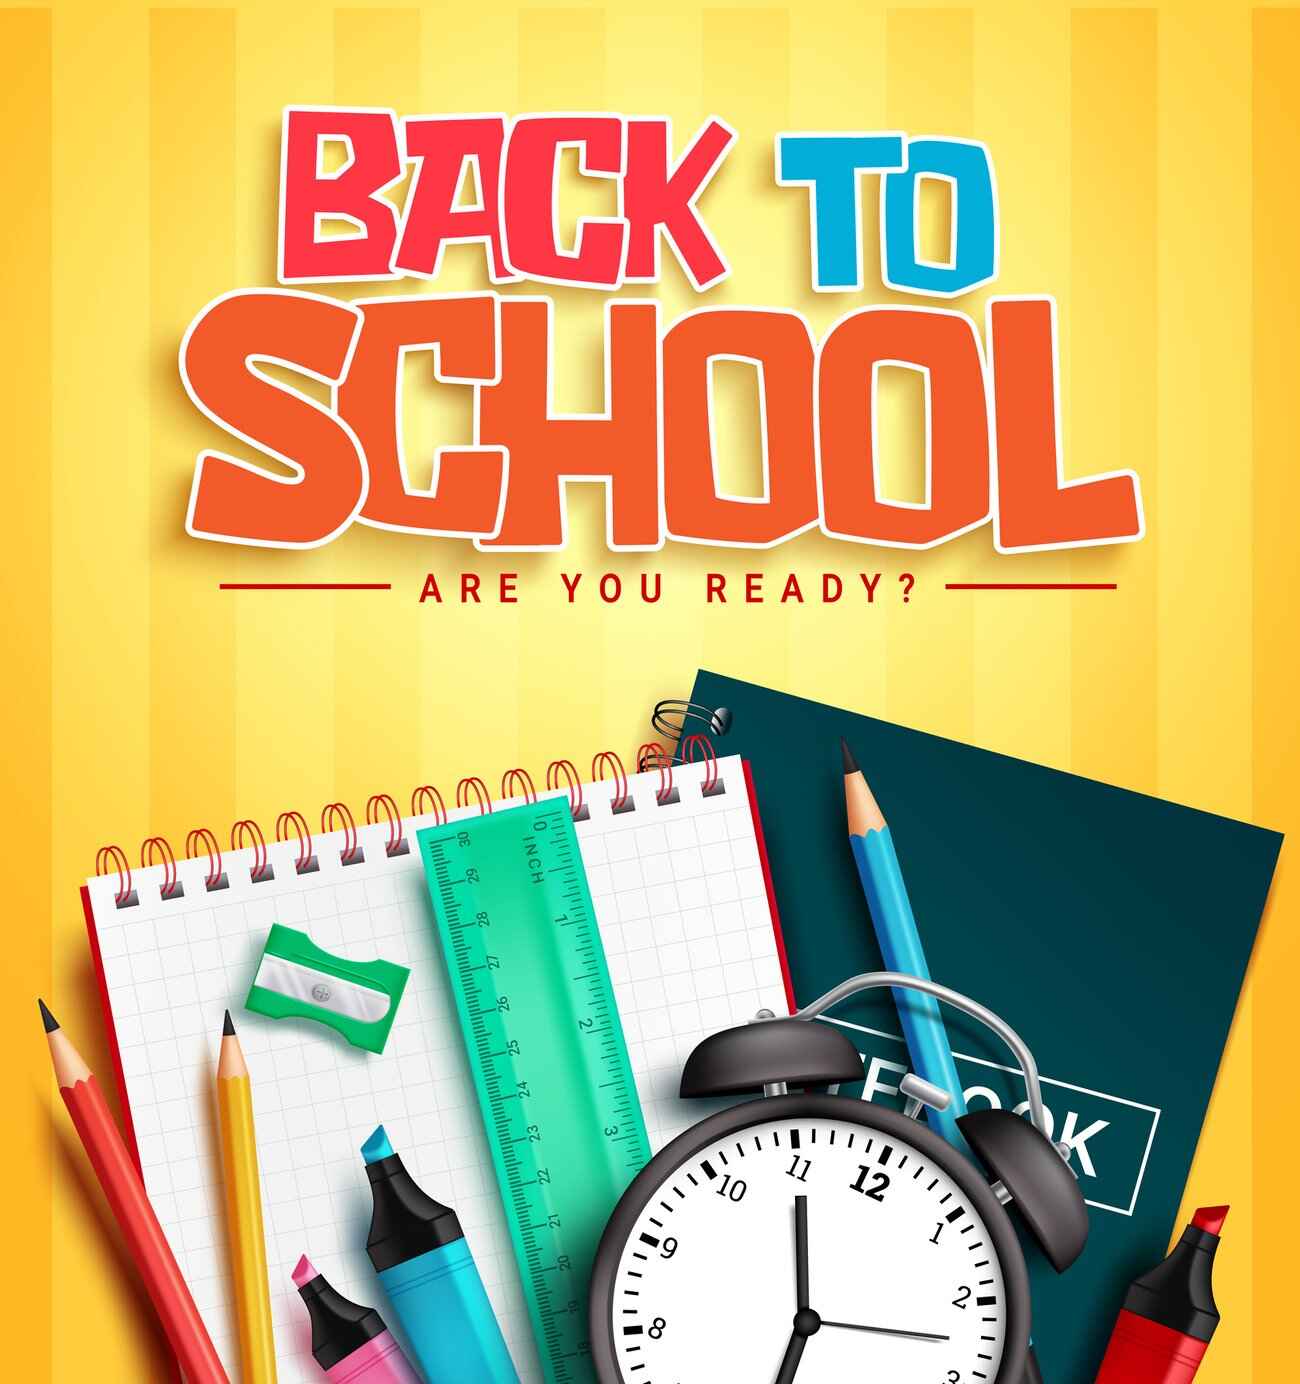 Schools are back - Are you ready?